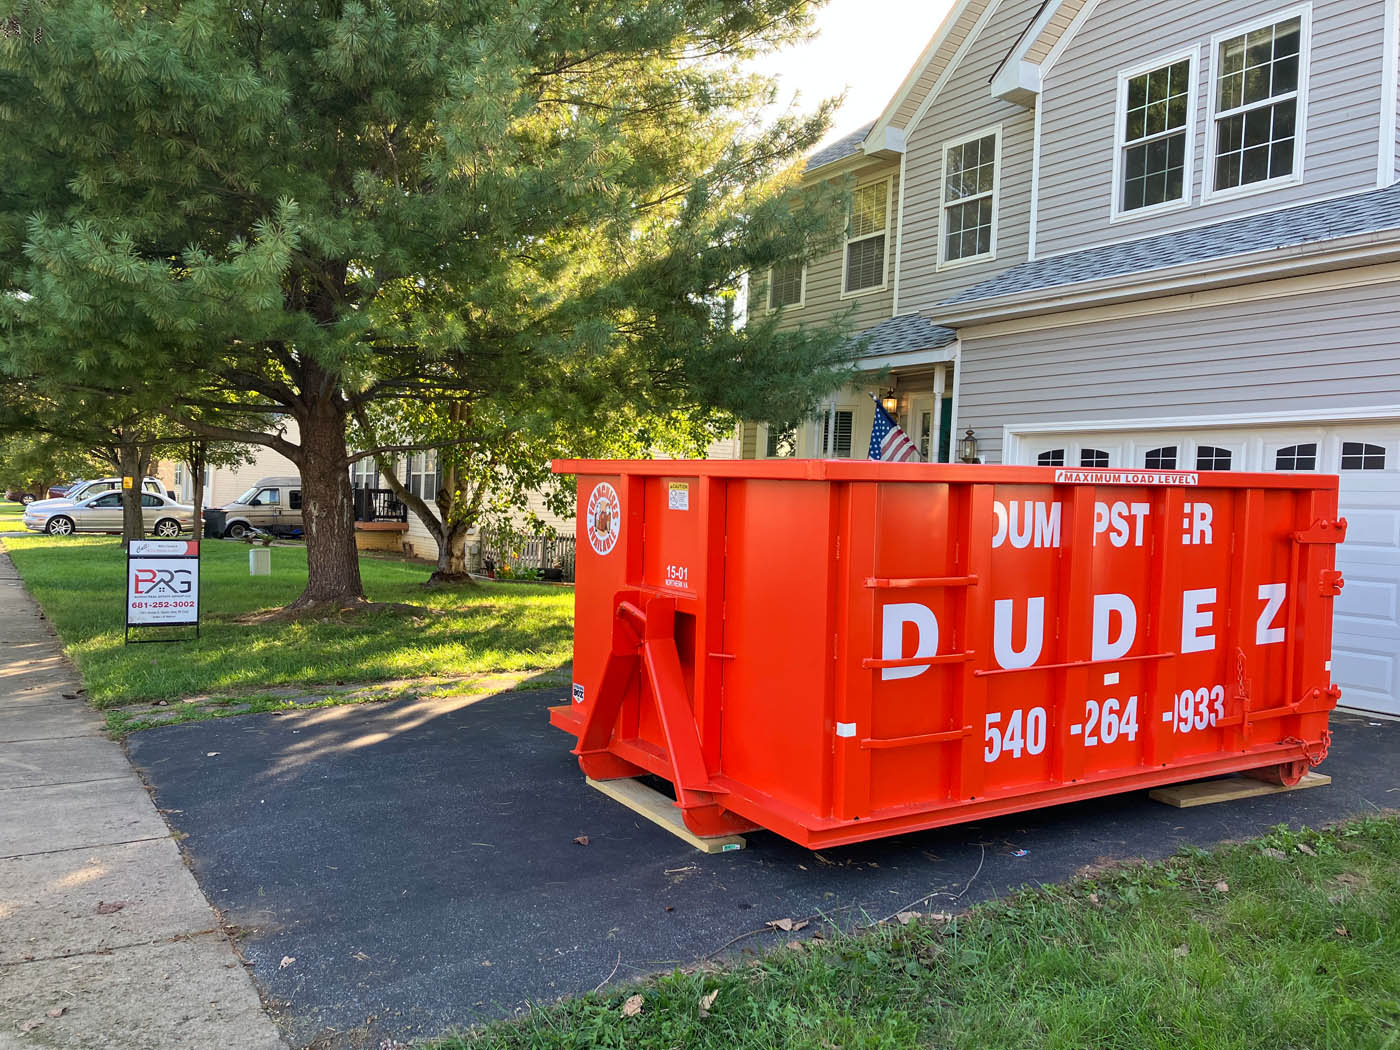 Dumpster Dudez rental dumpster in front of a home - learn how to streamline your moving with our rental services!